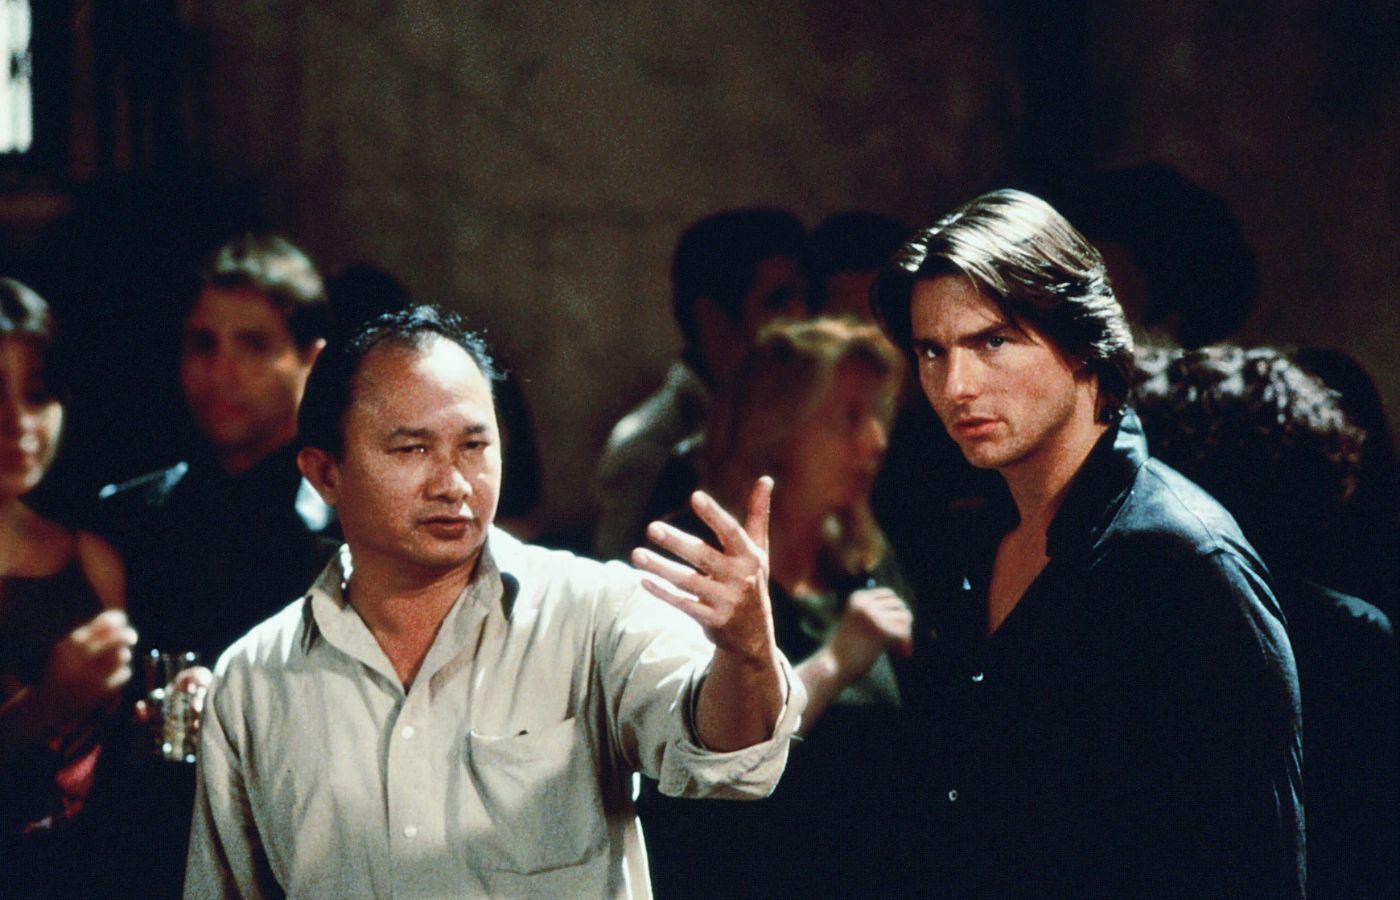 John Woo directing Mission: Impossible 2